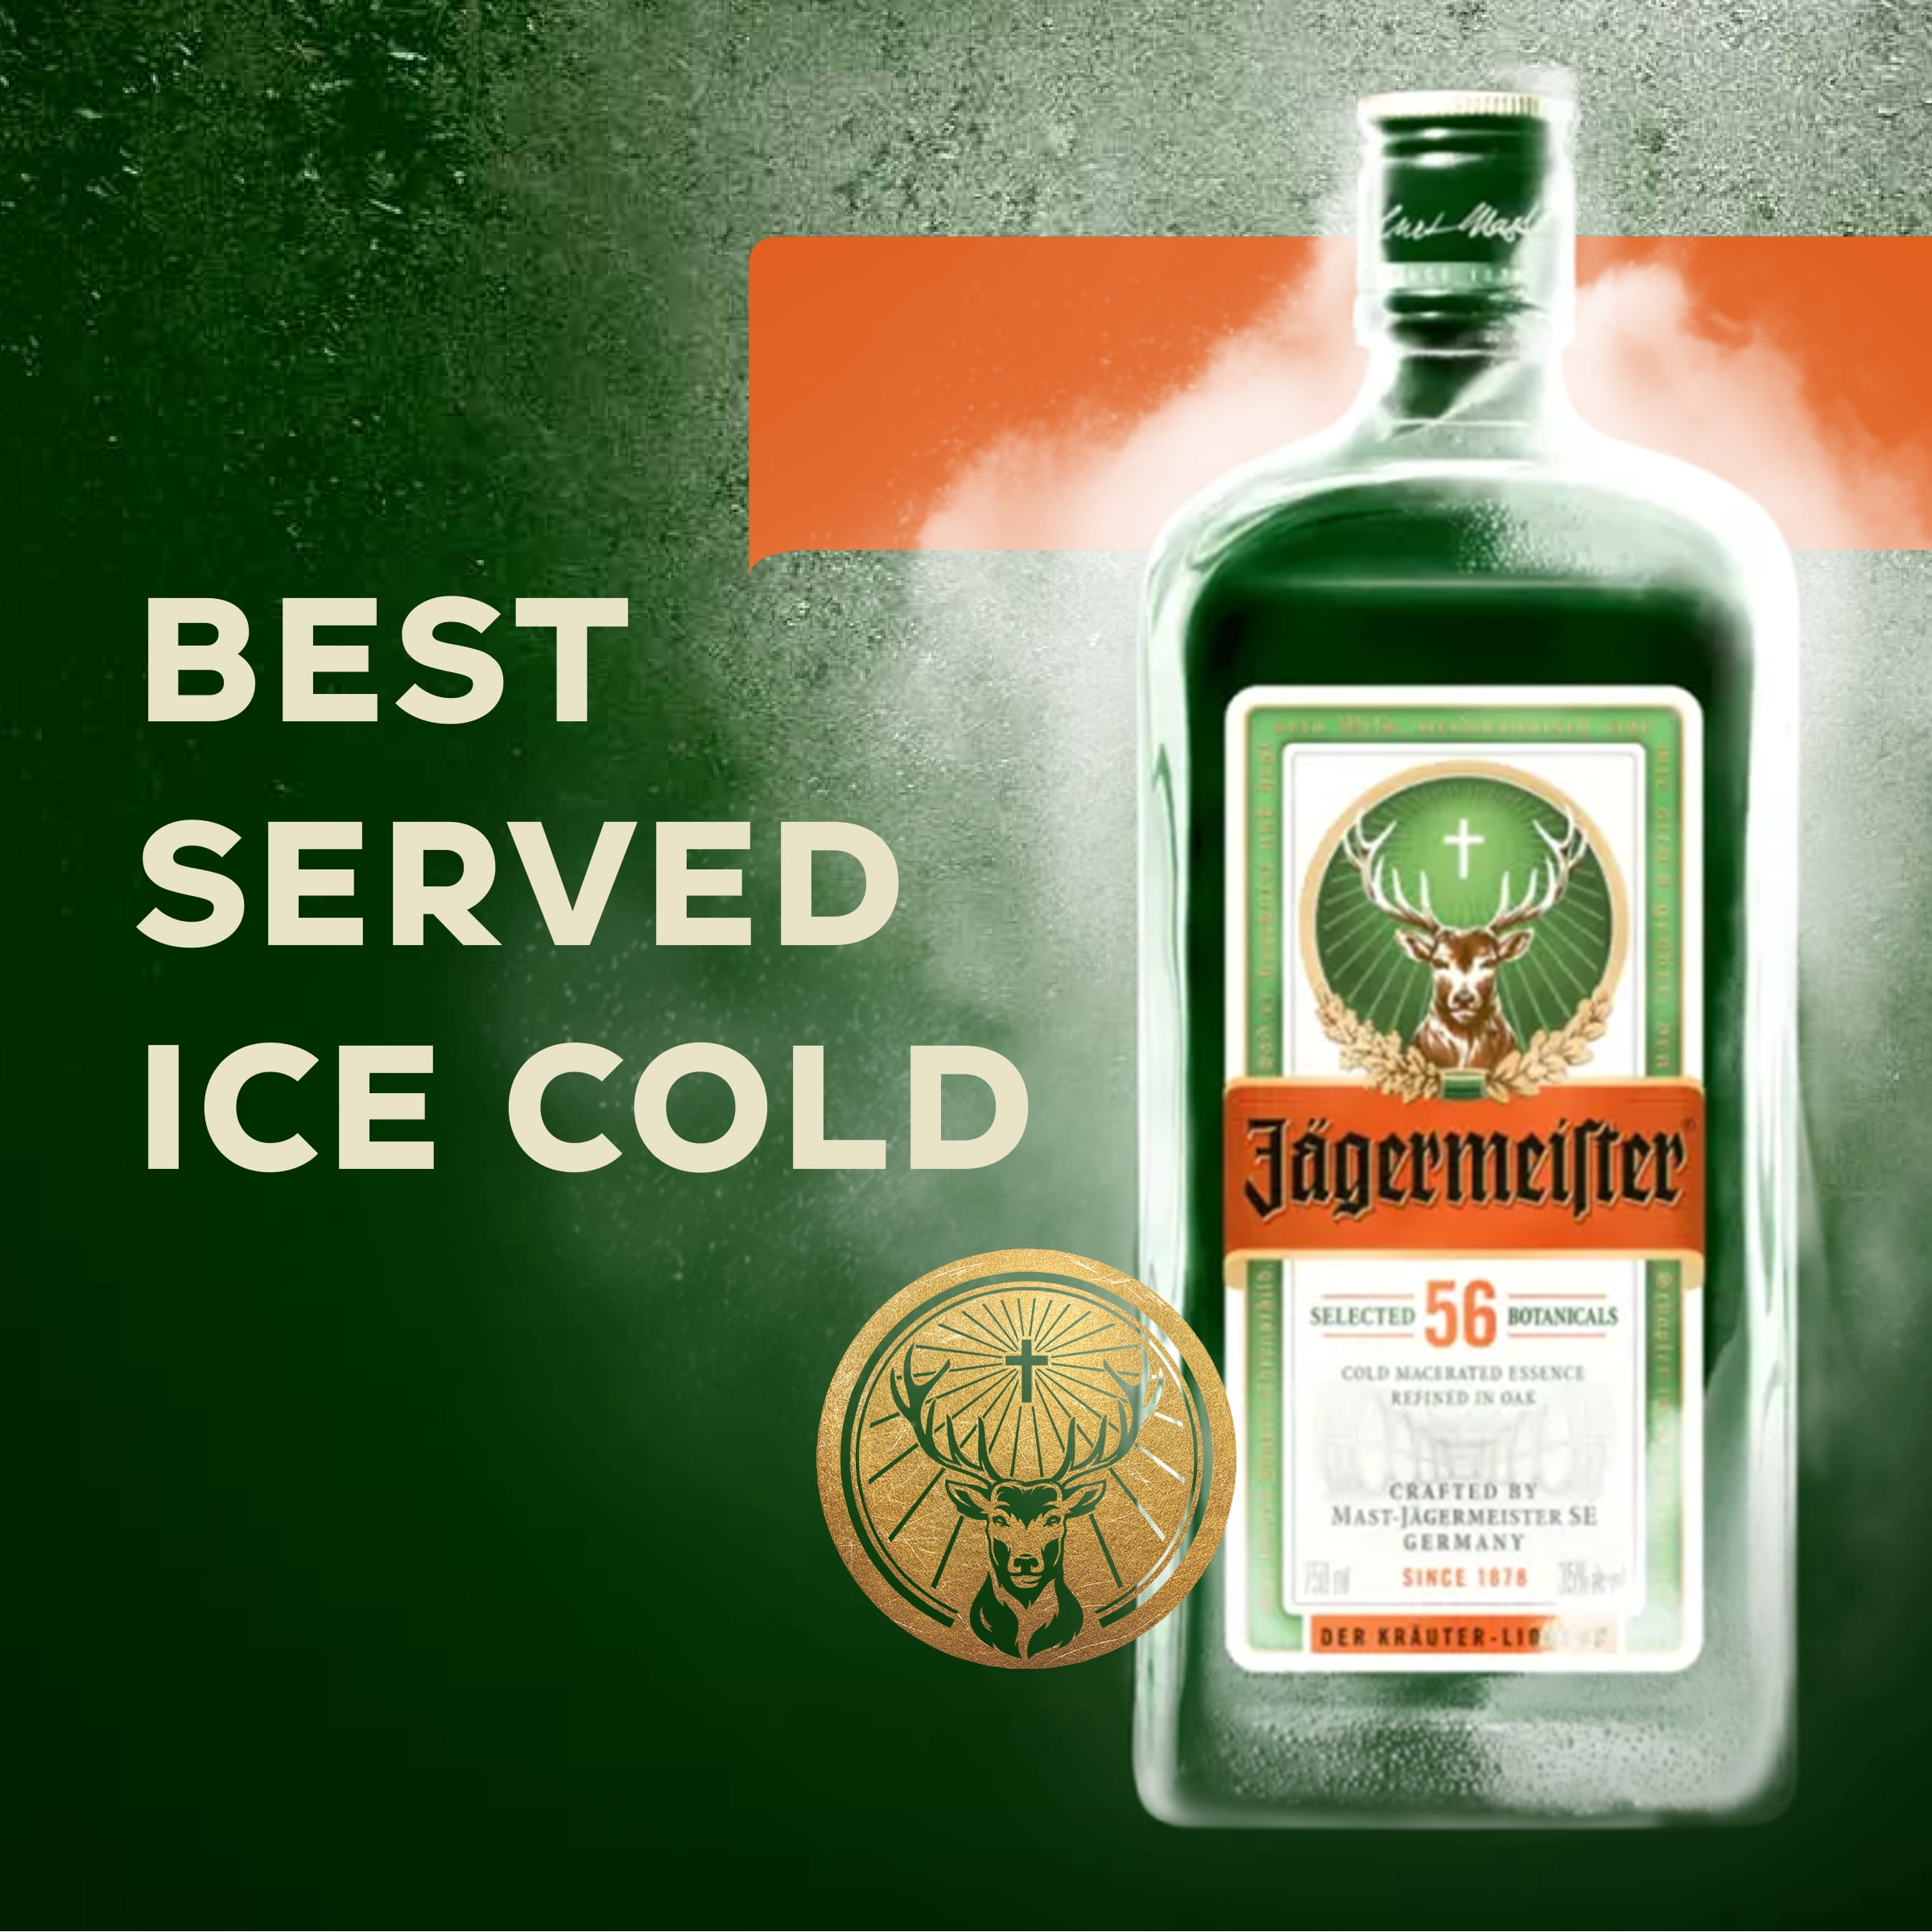 Purchase Jagermeister Liquor Online - Low Prices